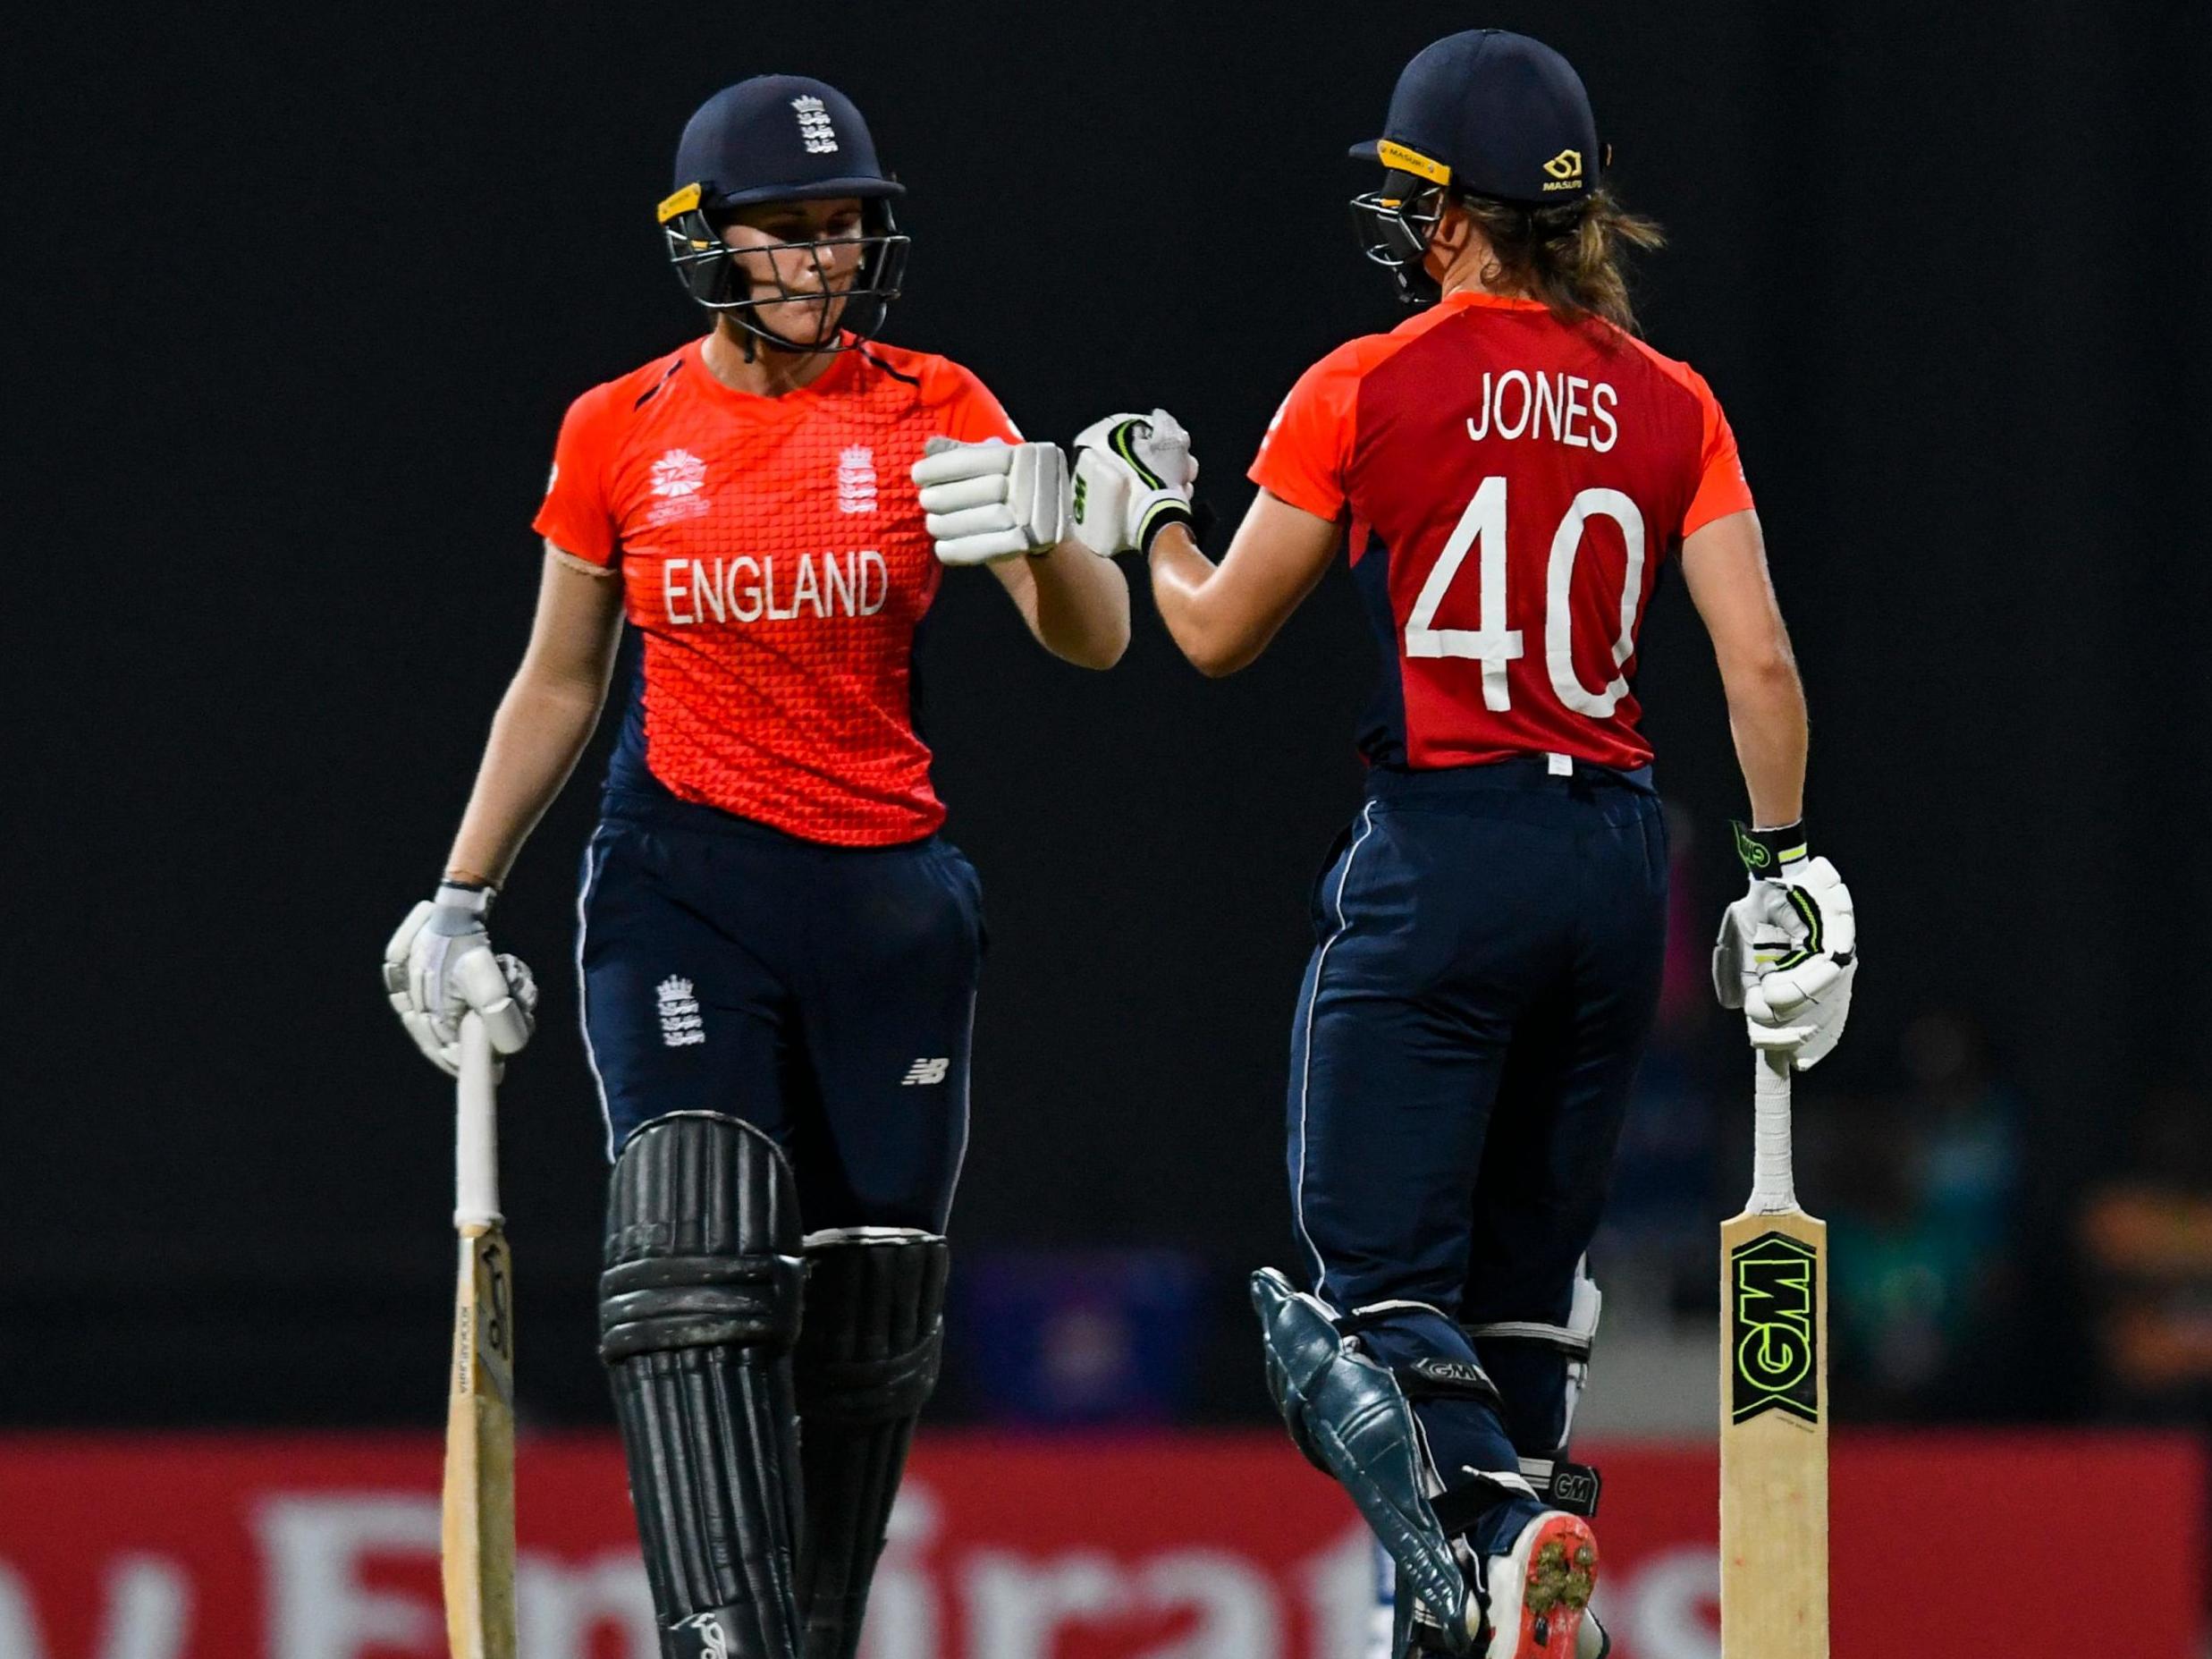 Heather Knight’s side lost to Australia in the final of the 2018 tournament